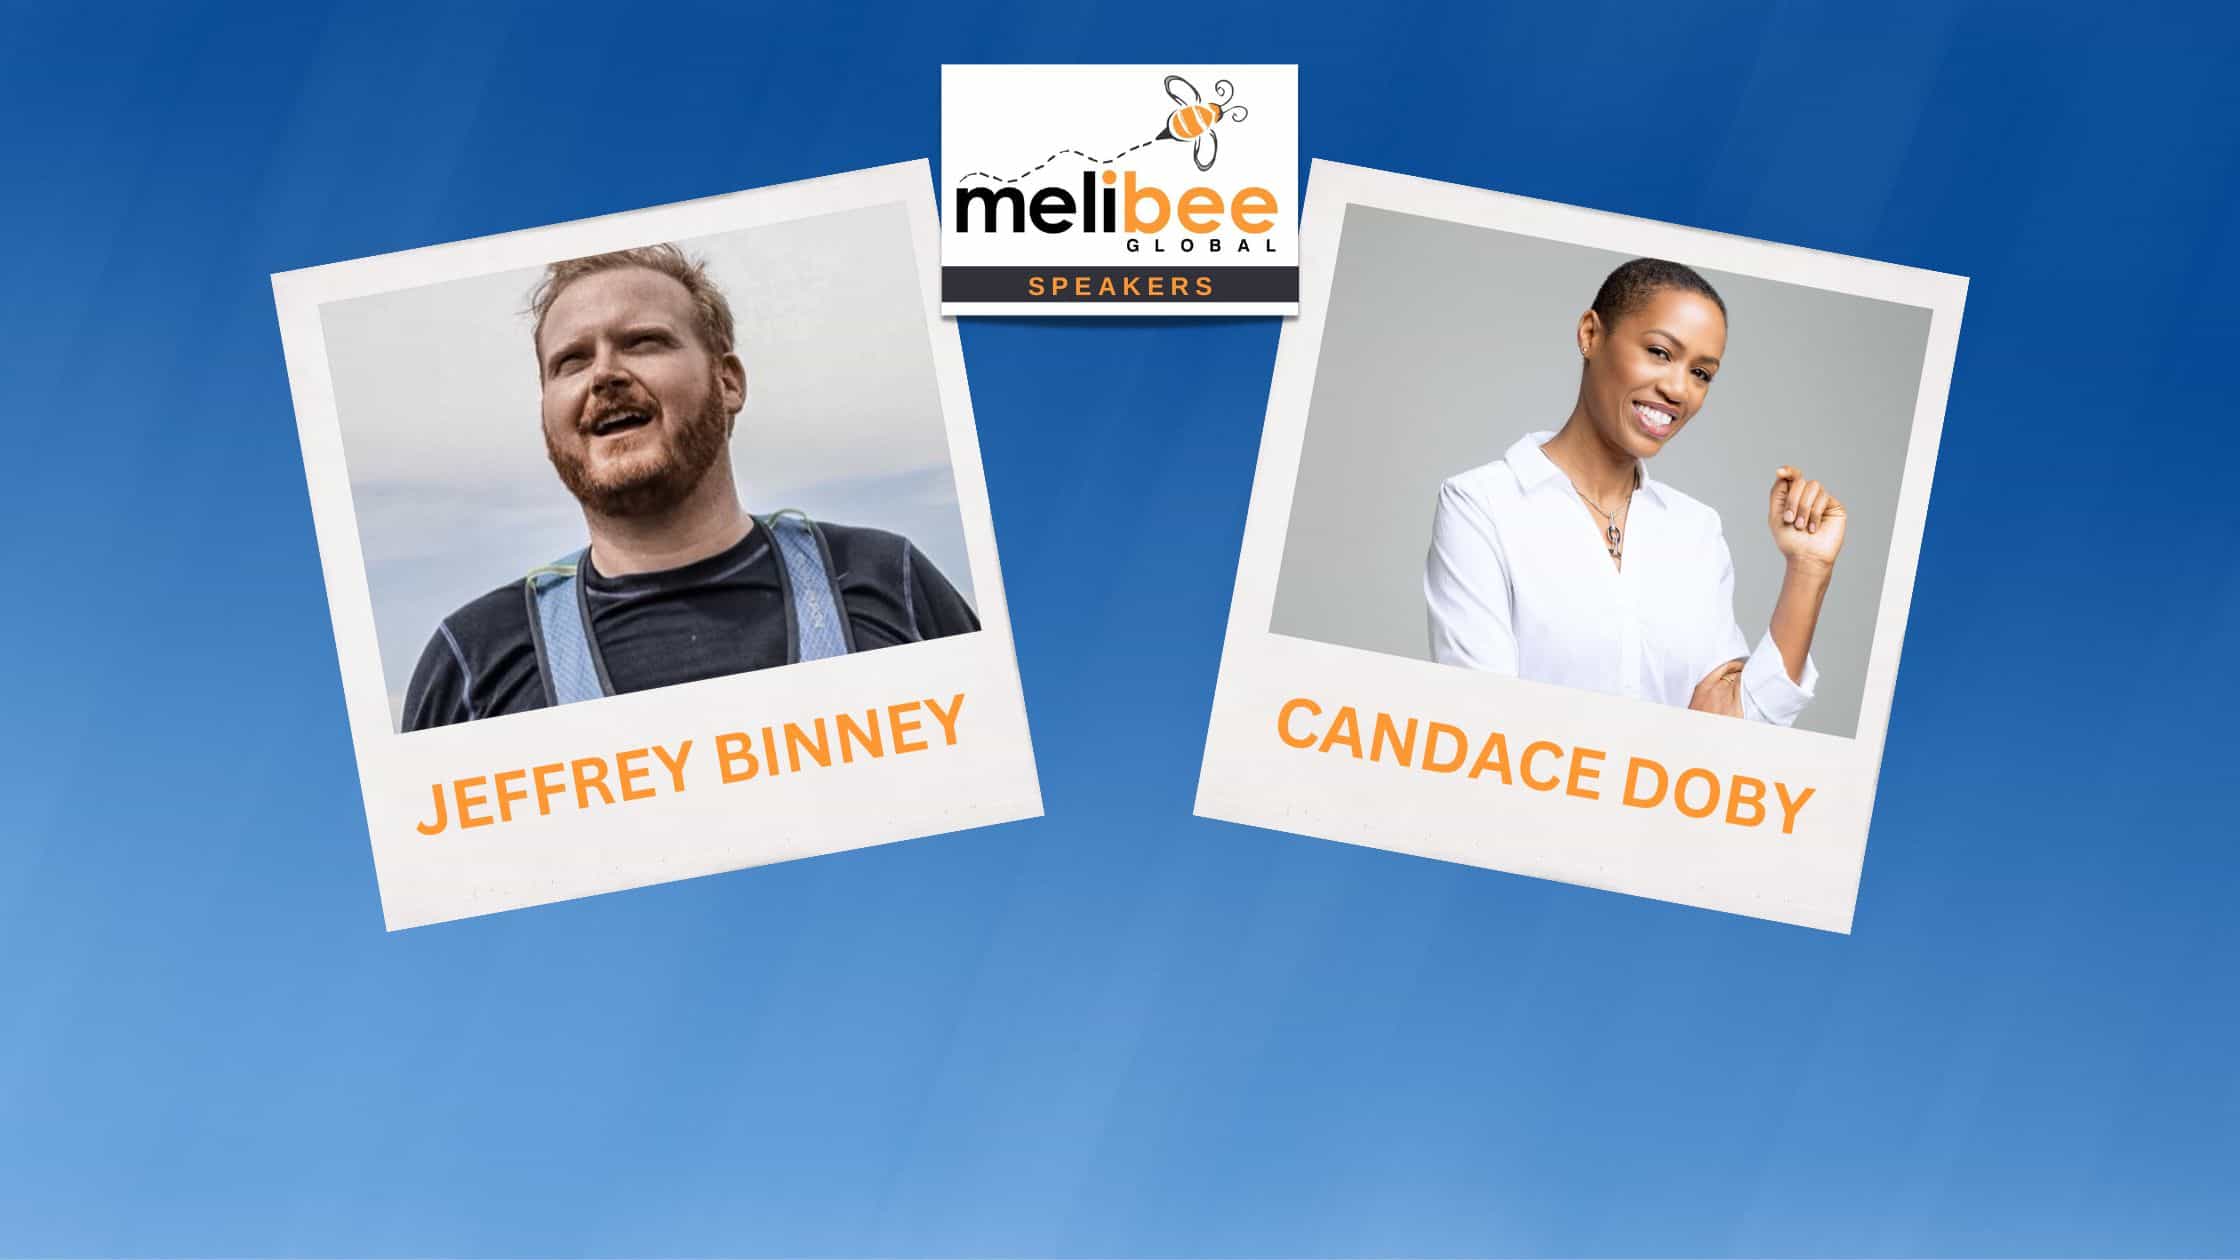 Melibee Global Speakers - Top Motivational Speakers Banner with Jeffrey Binney and Candace Doby